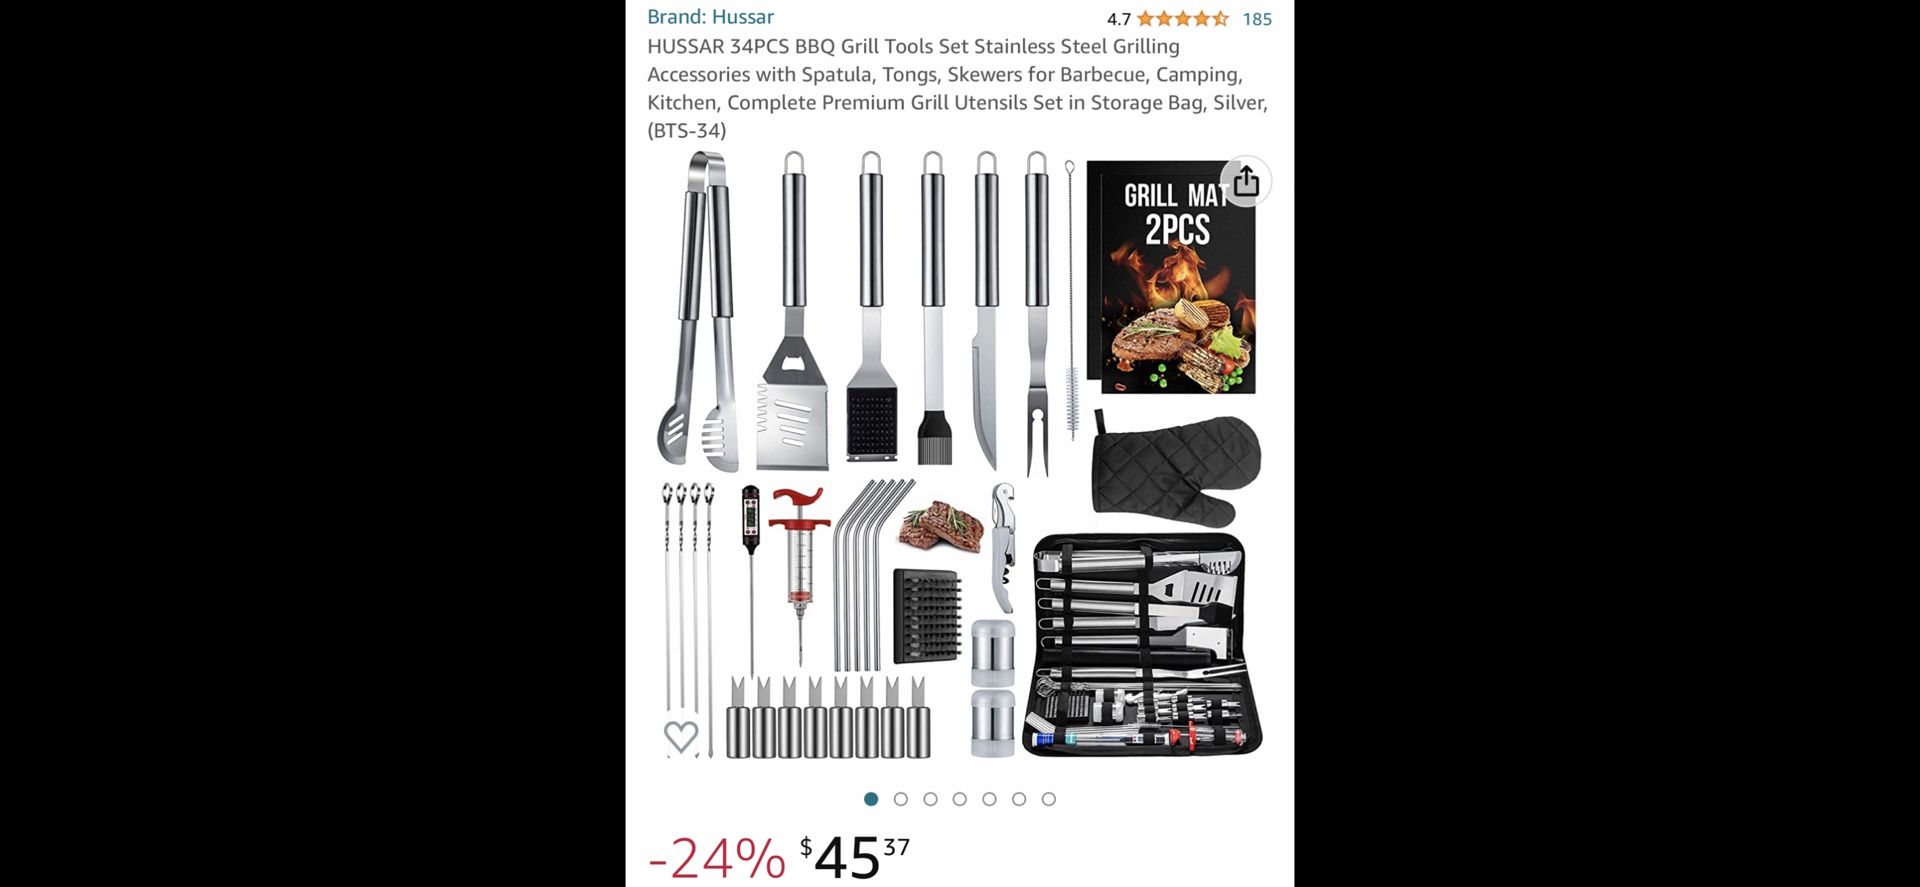 HUSSAR 34PCS BBQ Grill Tools Set Stainless Steel Grilling